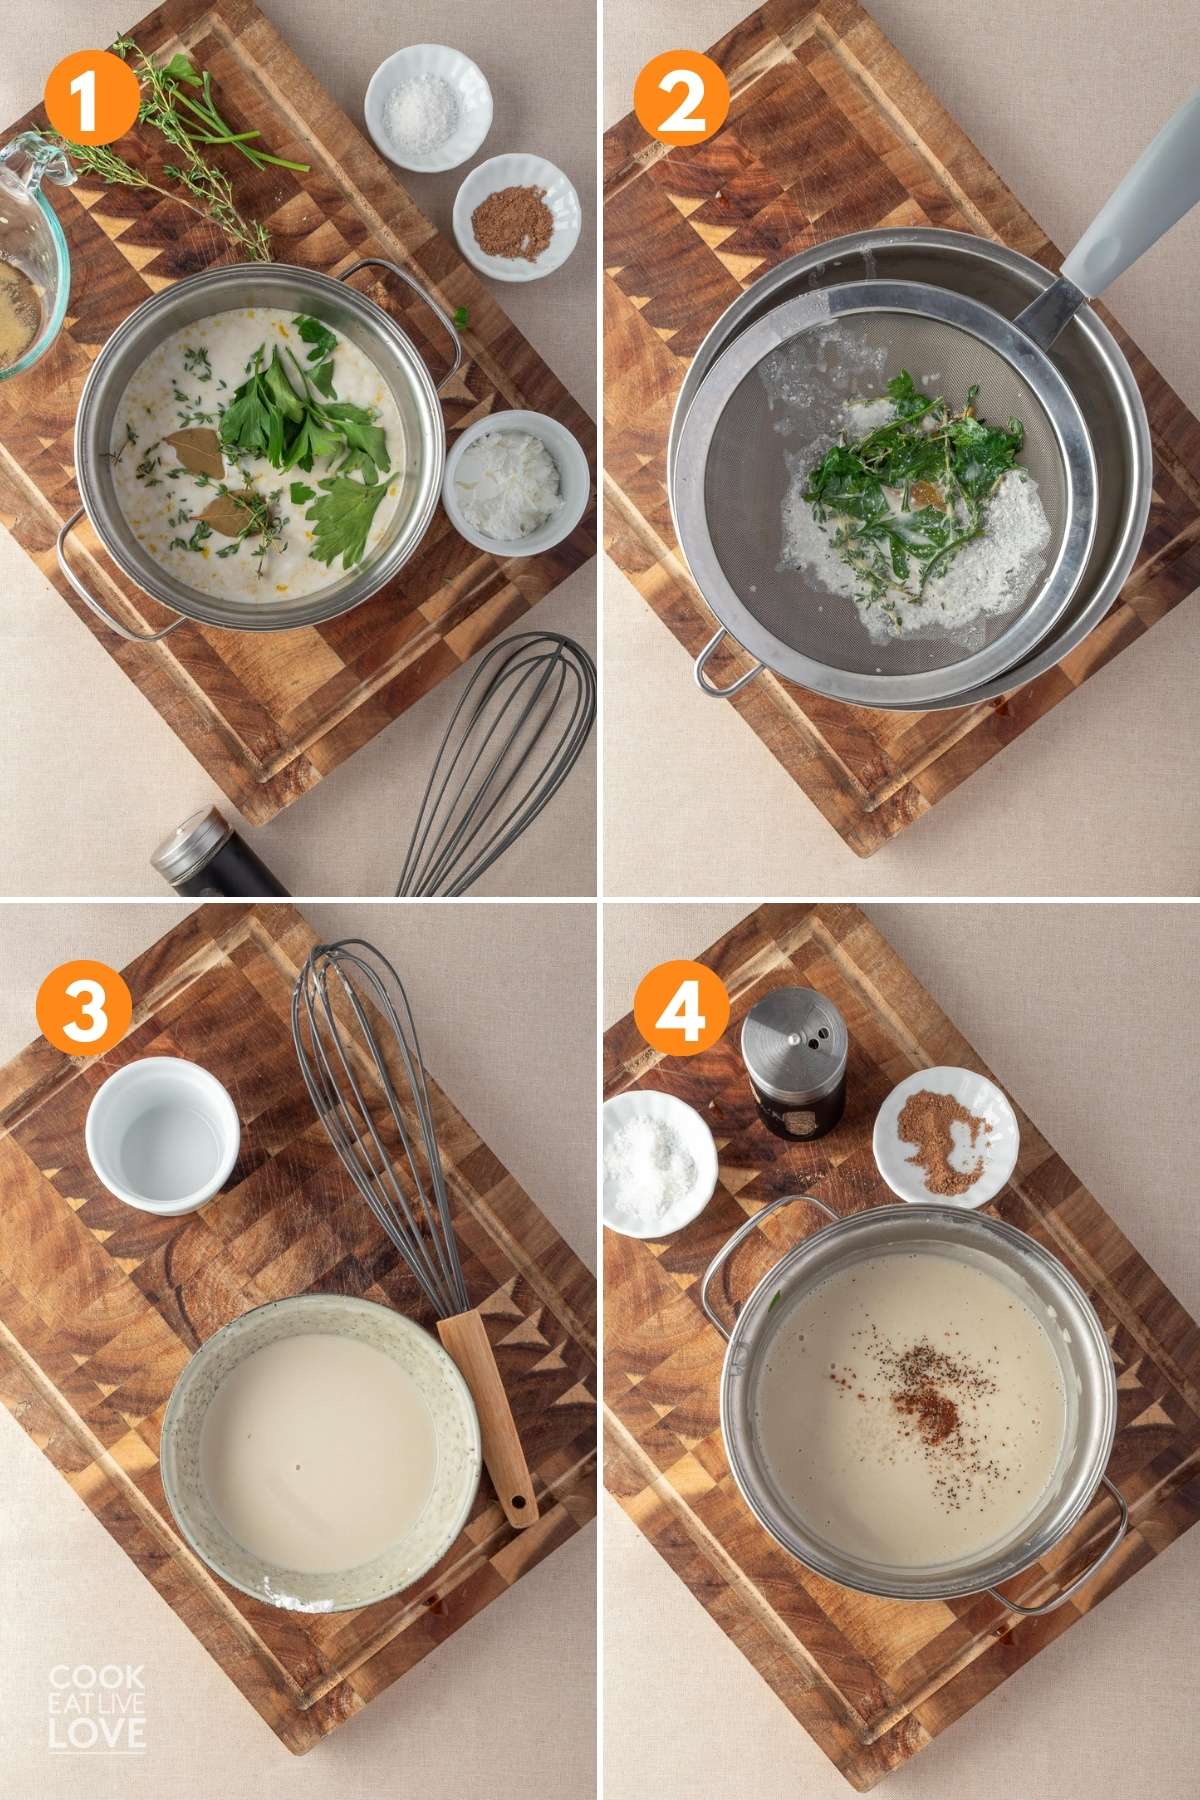 A collage of images showing how to make the vegan cream sauce.